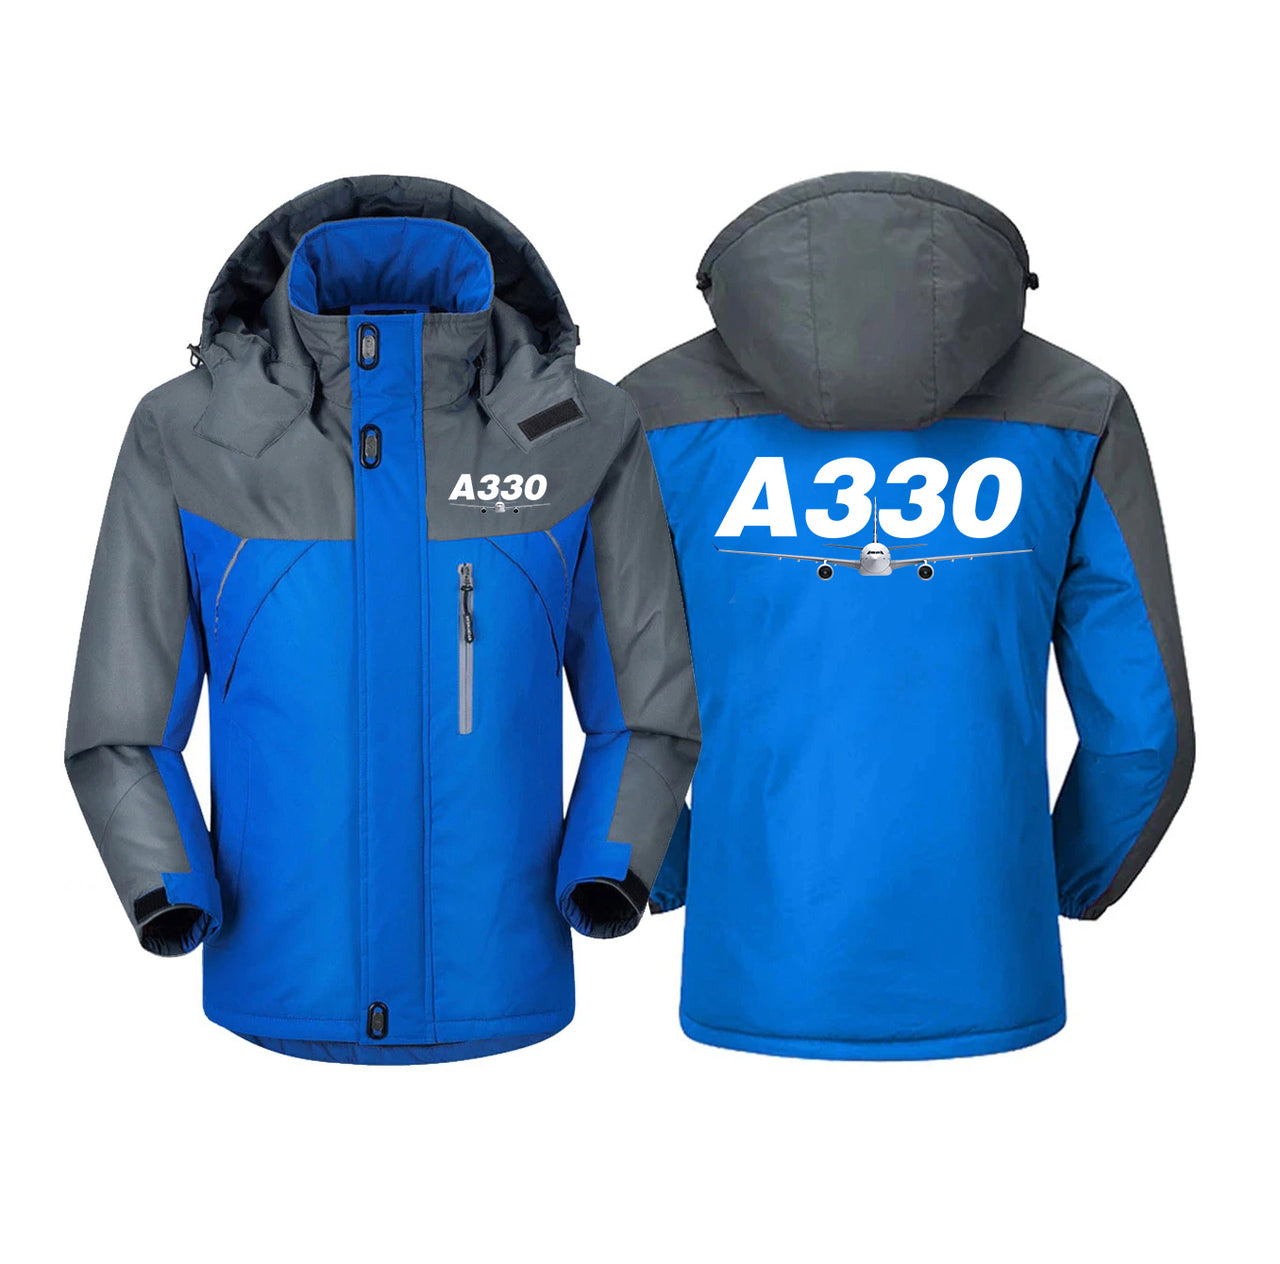 Super Airbus A330 Designed Thick Winter Jackets